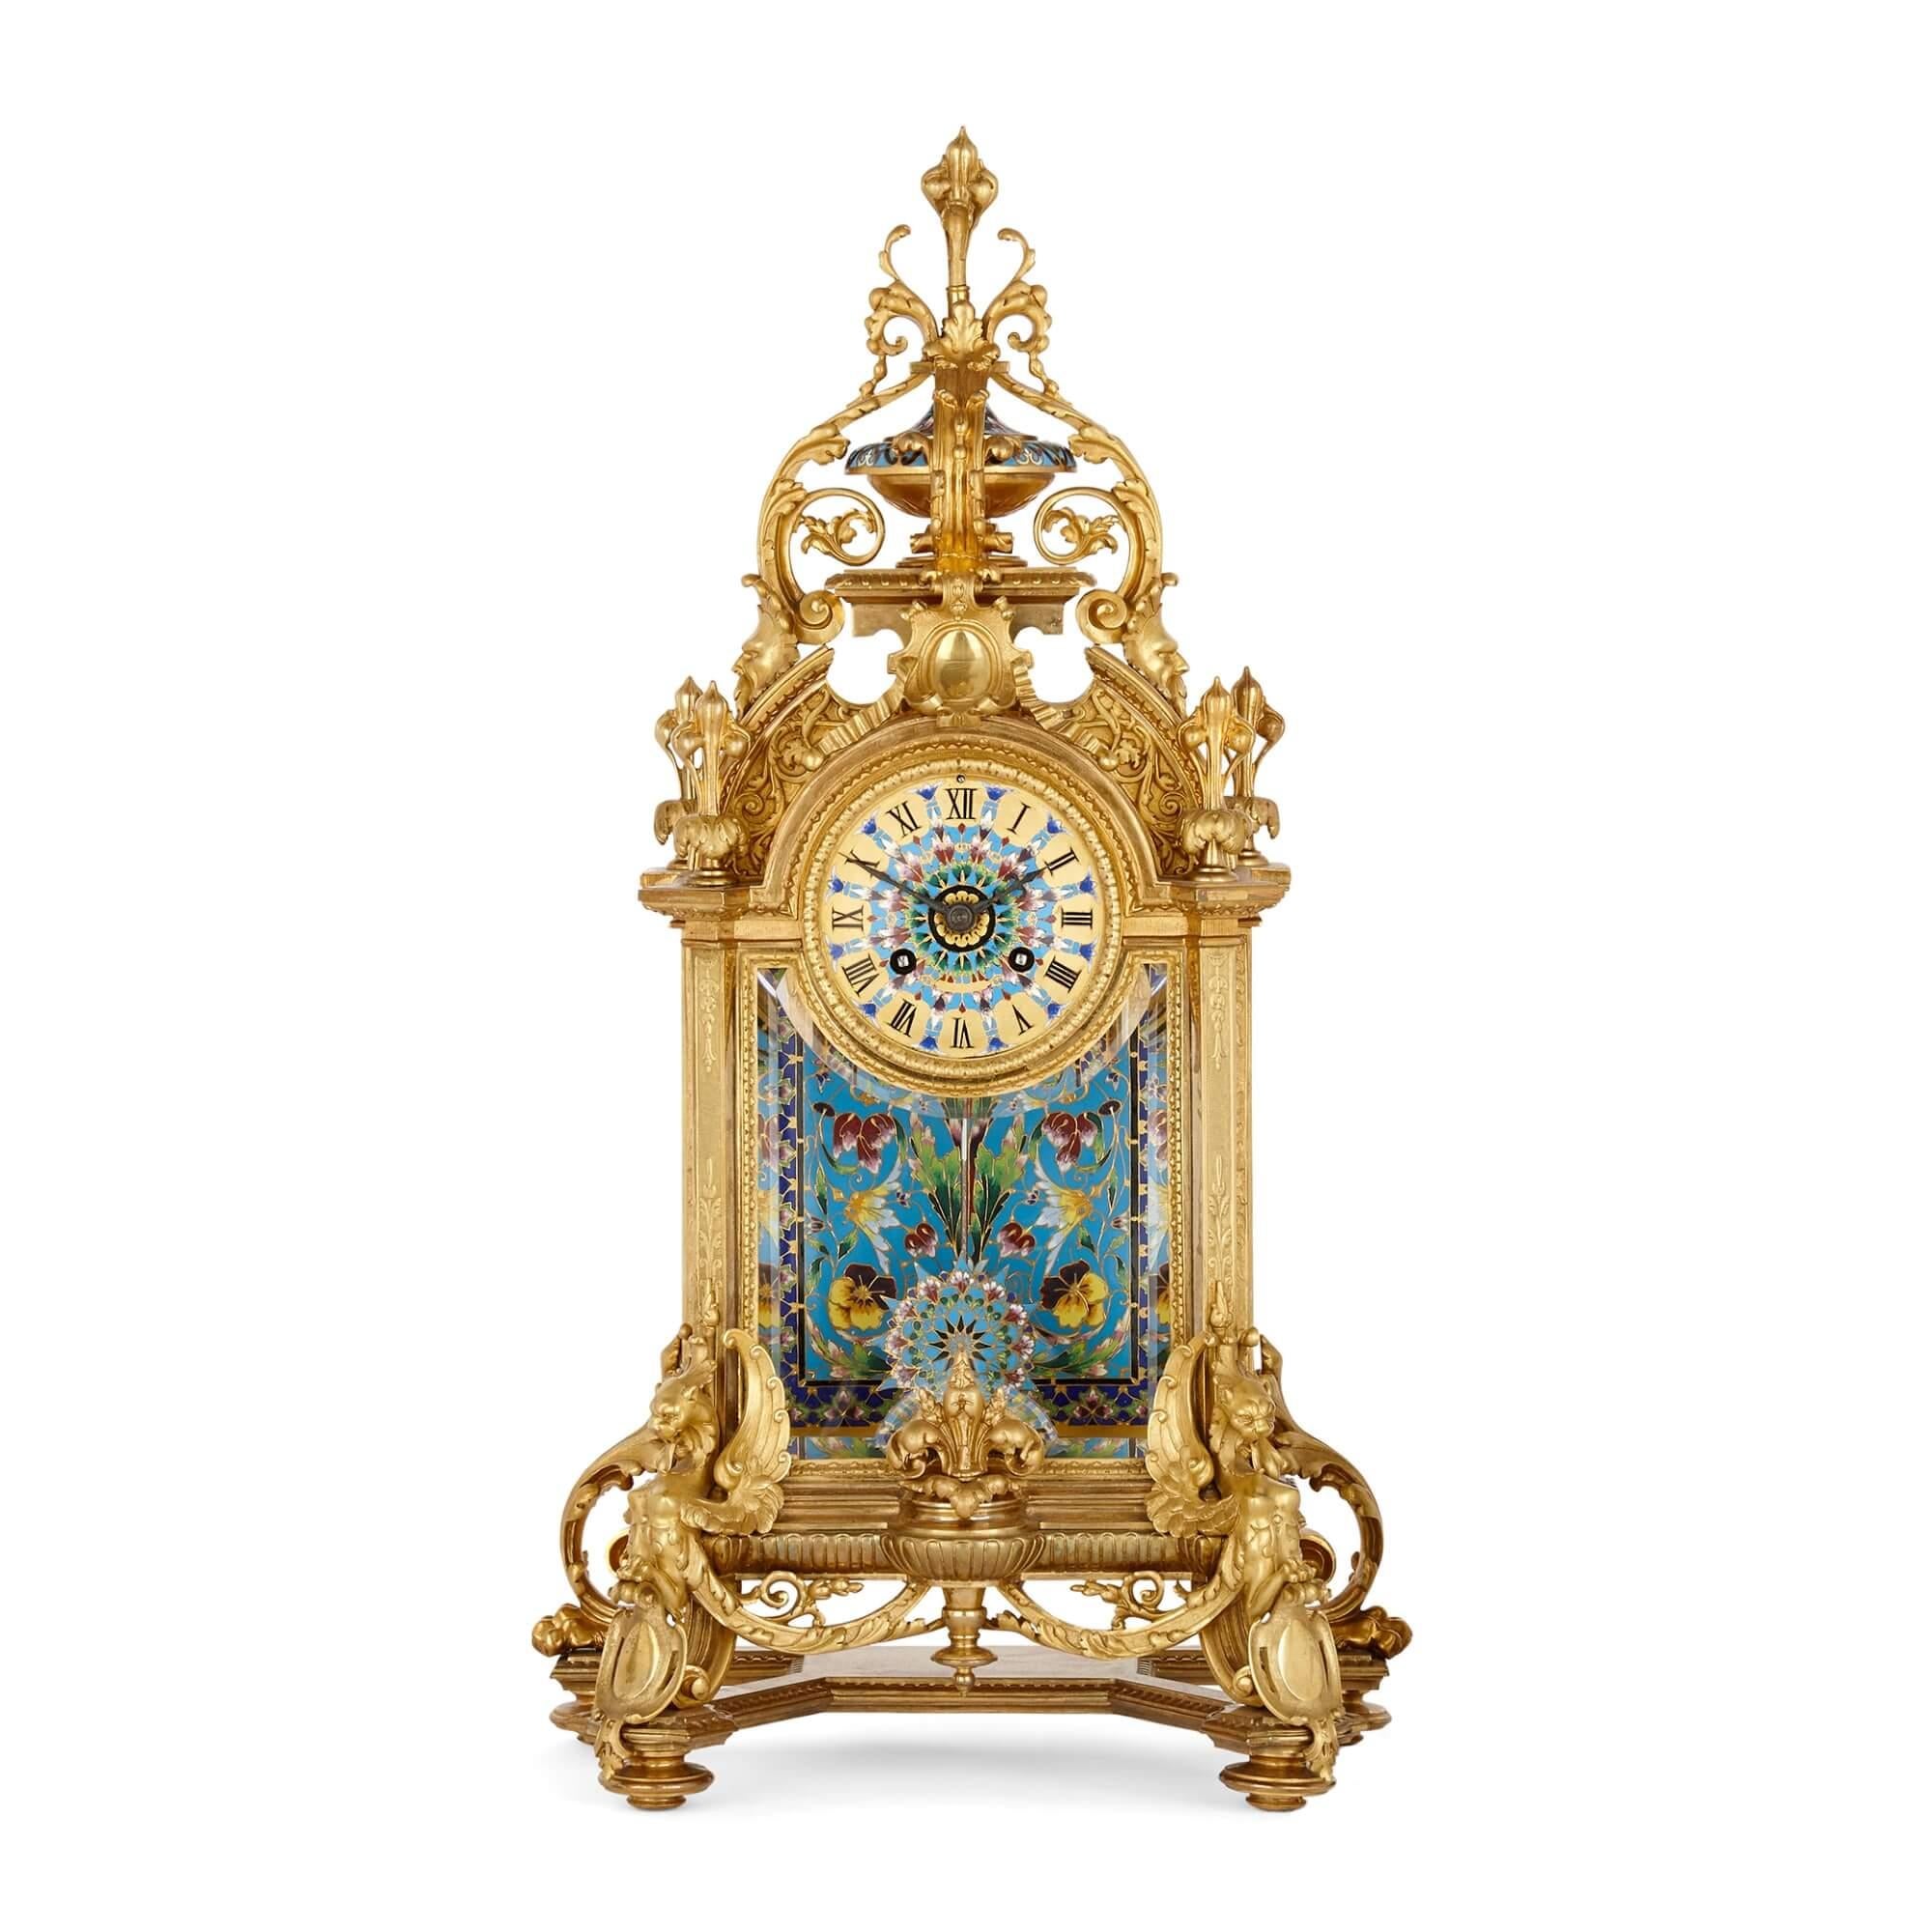 Large Ormolu and Cloisonné Enamel three piece clock set.
French, 19th Century
Clock: height 54cm, width 29cm, depth 17cm
Vases: height 35cm, width 15cm, depth 14cm

Comprising a clock and pair of flanking vases, all similarly decorated, this